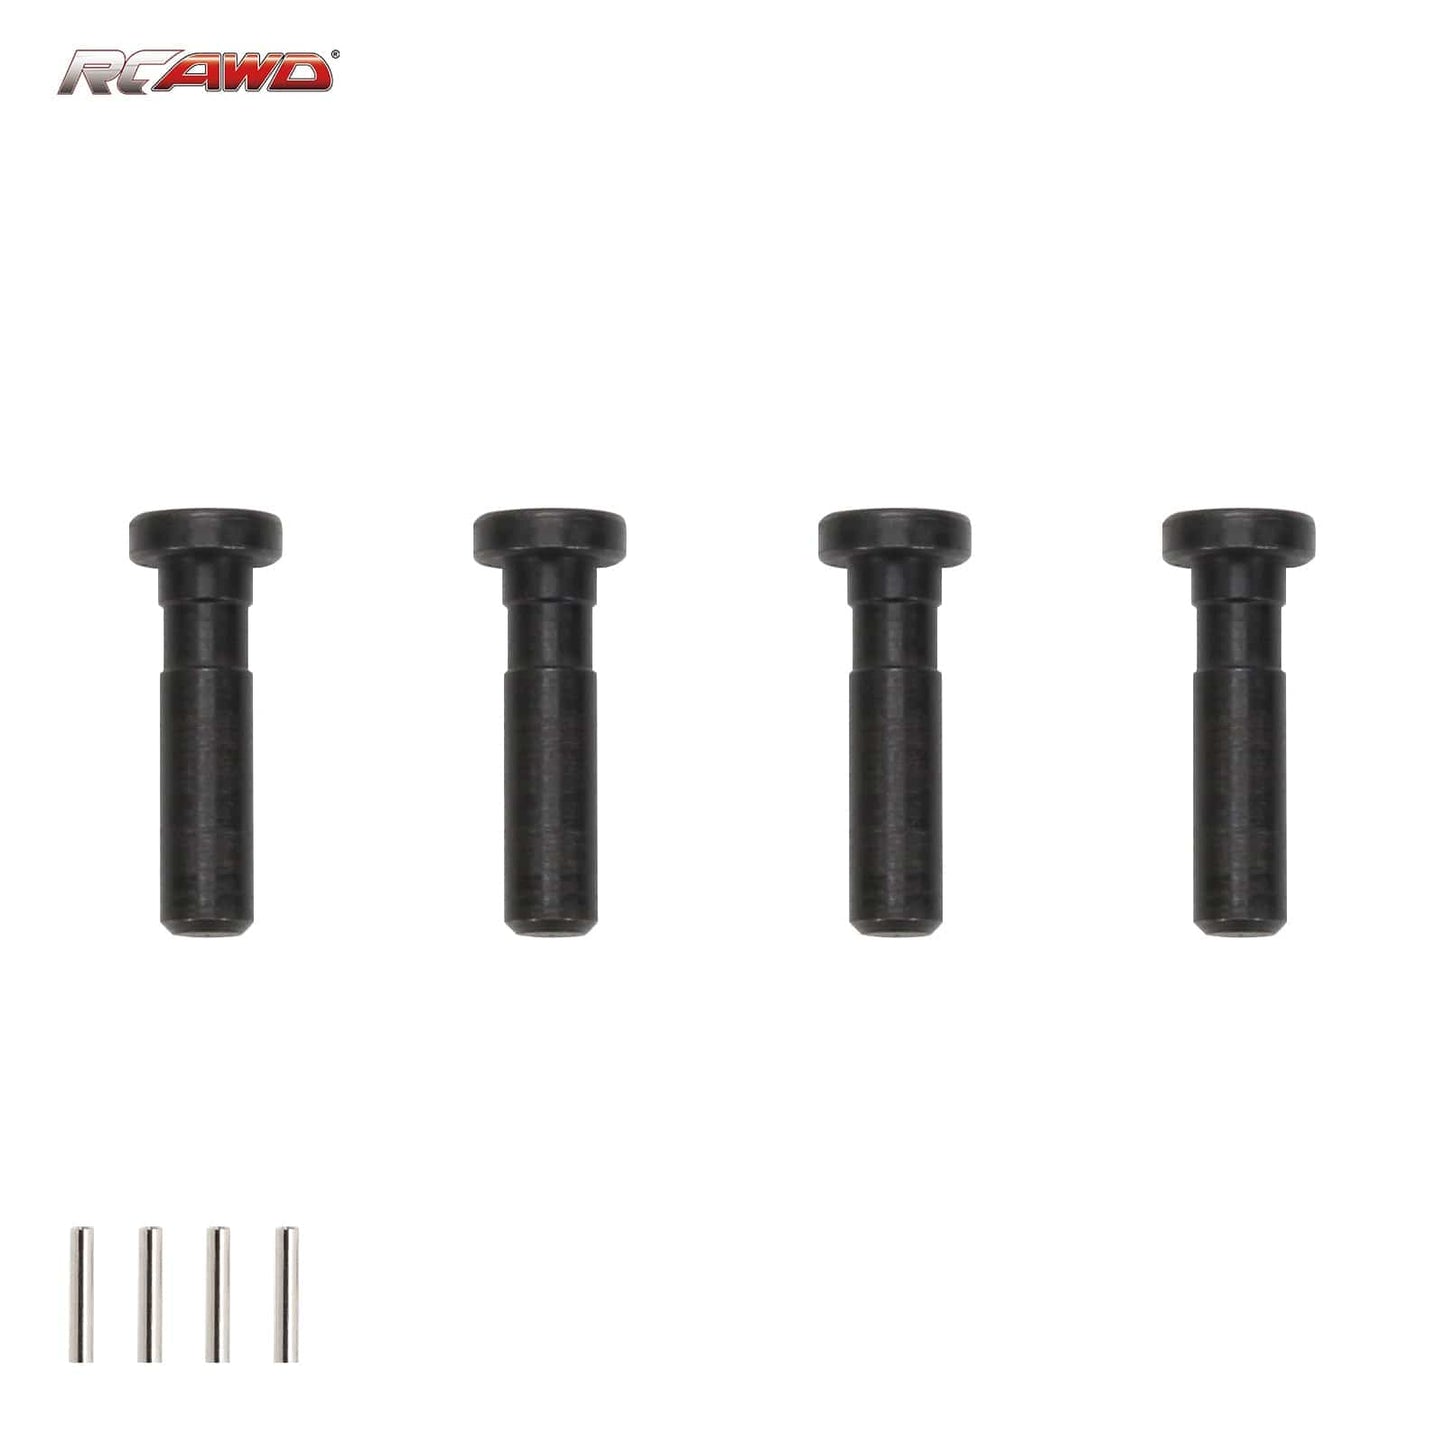 RCAWD LOSI 1/8 LMT Black #45 Front Kingpin steering screw pin 4*17.5MM for 1-8 Losi LMT RC car Upgrded part